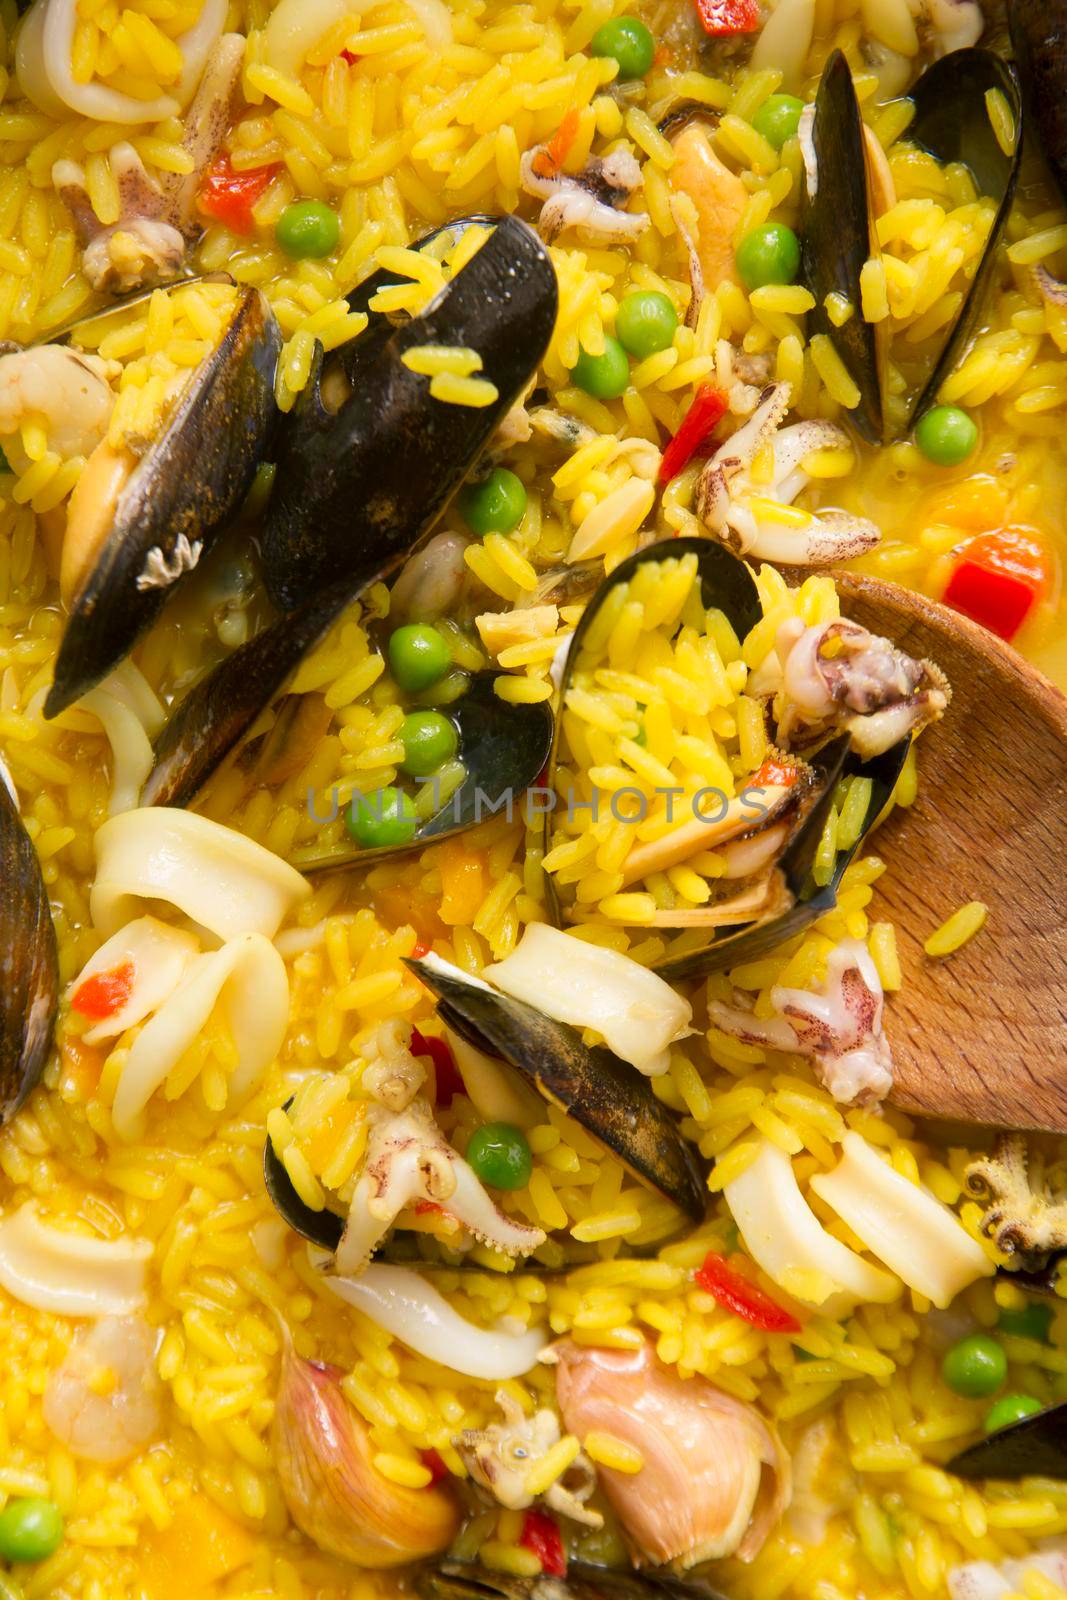 Presentation of a dish of Spain, paella being cooked